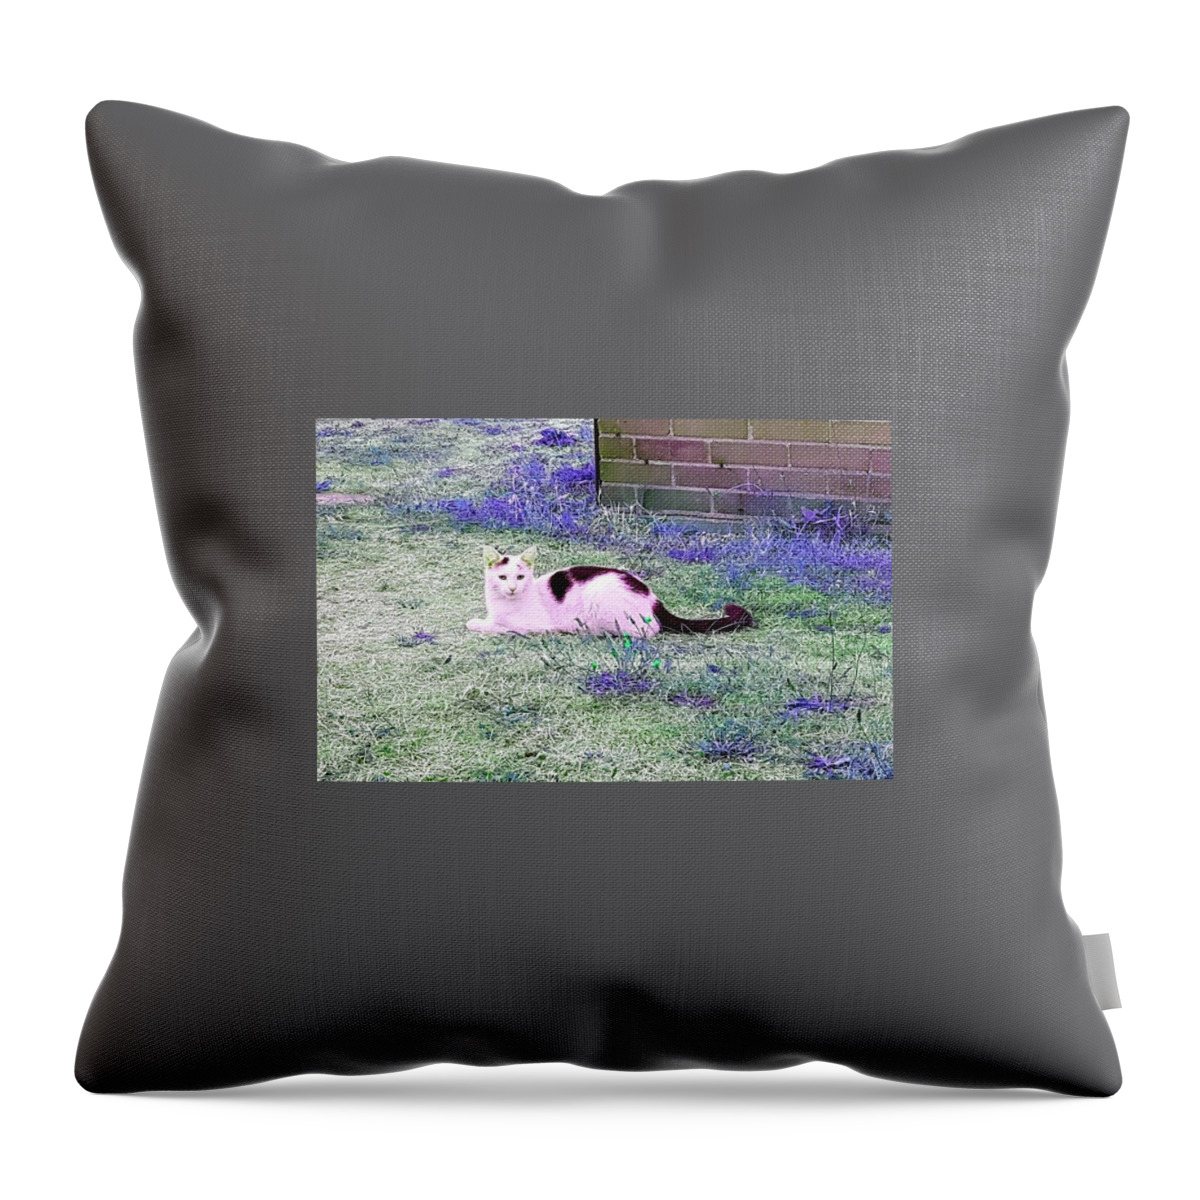 Fantasy Throw Pillow featuring the photograph Rico Resting In Emerald Indigo by Rowena Tutty